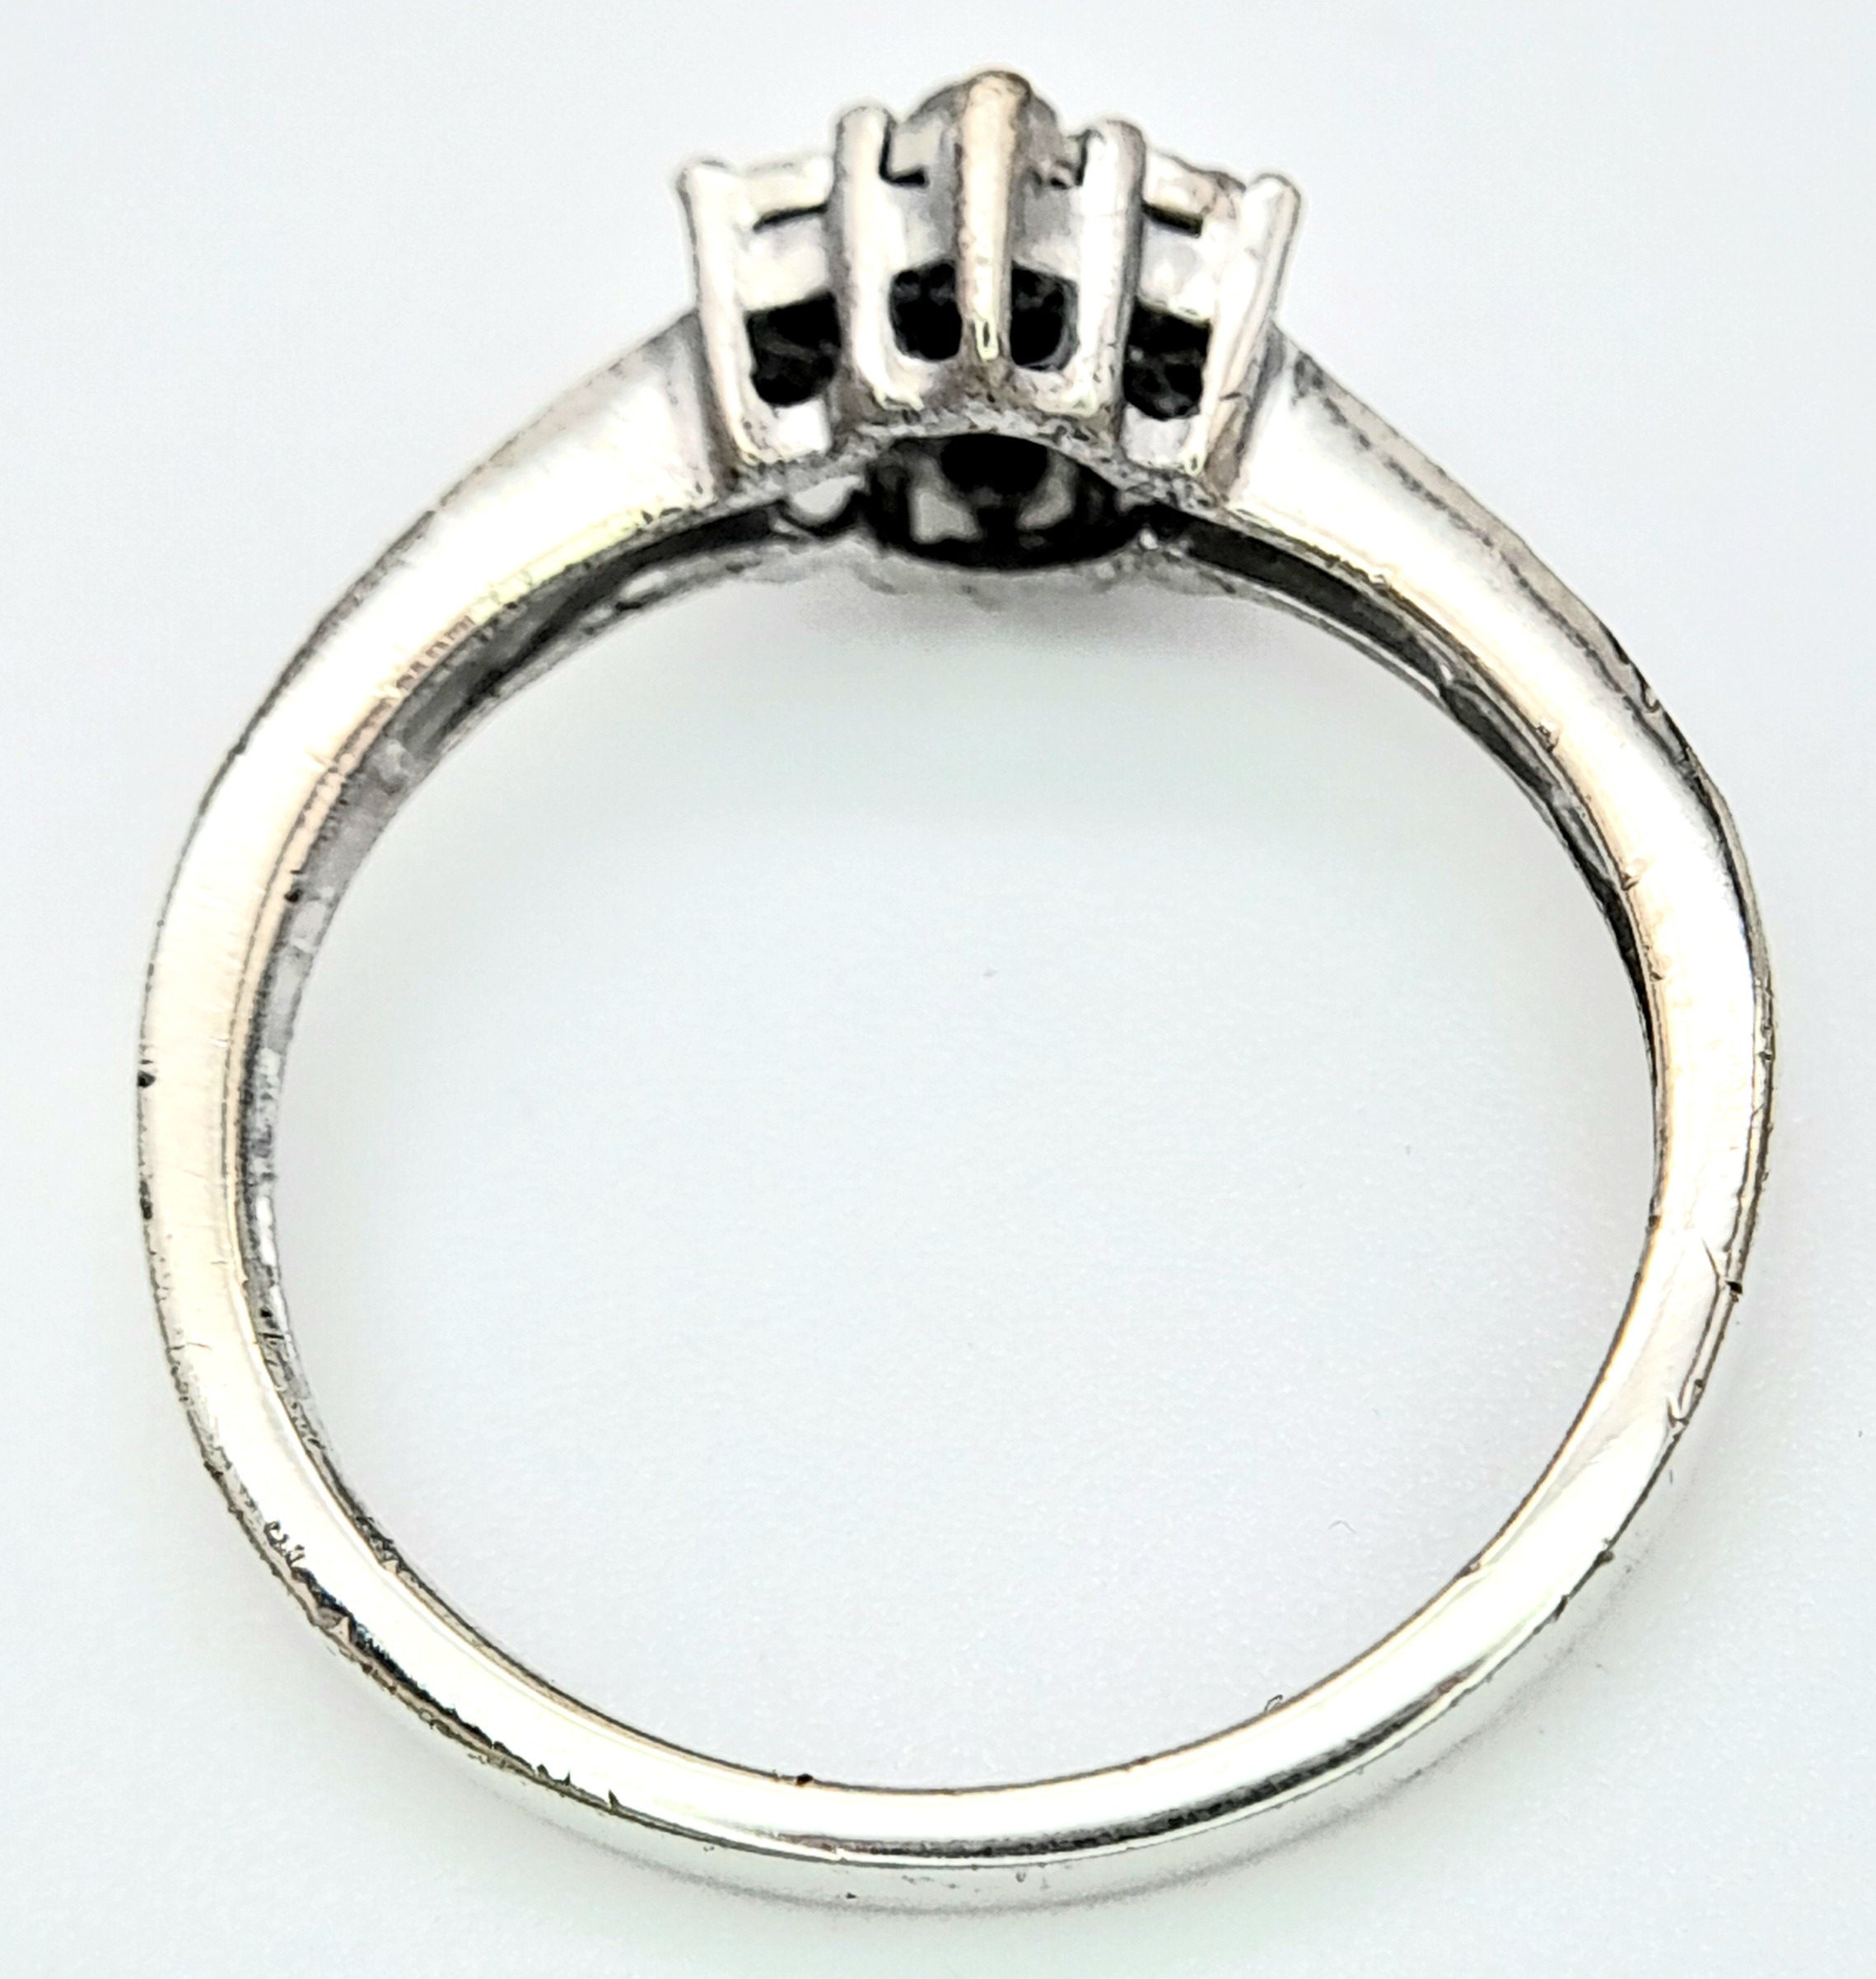 A 9K WHITE GOLD DIAMOND RING. Size M, 2.5g total weight. Ref: SC 8019 - Image 5 of 6